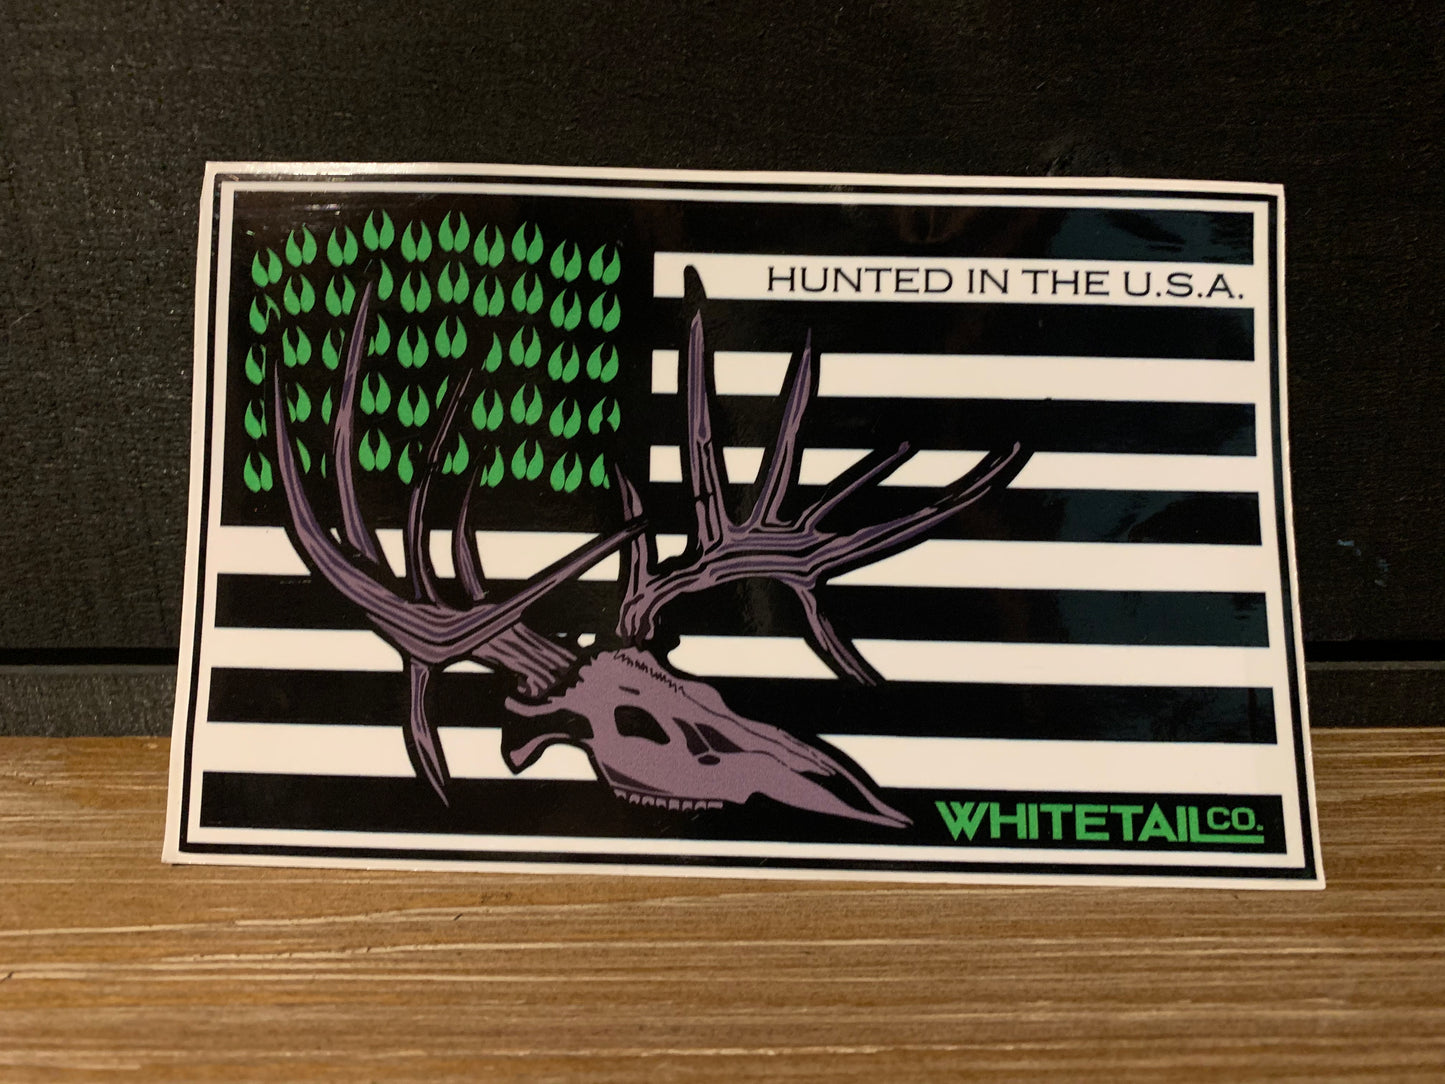 6” American Flag Whitetail Company Decal